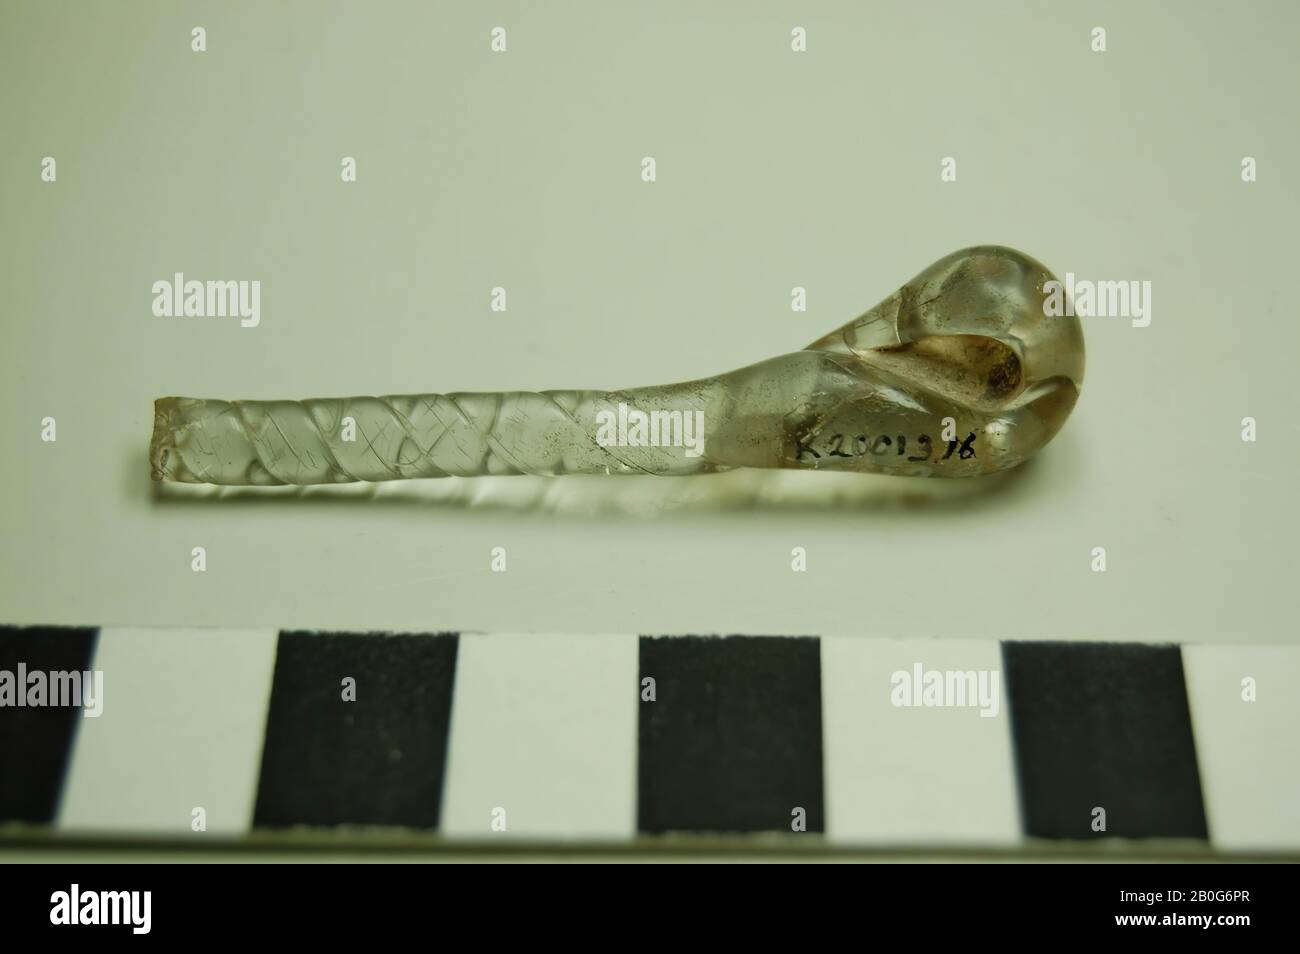 Glass shard of transparent glass with air bubbles and a twisted, spiral end. Old inventory number: 14243., shard, glass, Height: 5.5 cm, Roman 50-100, unknown Stock Photo